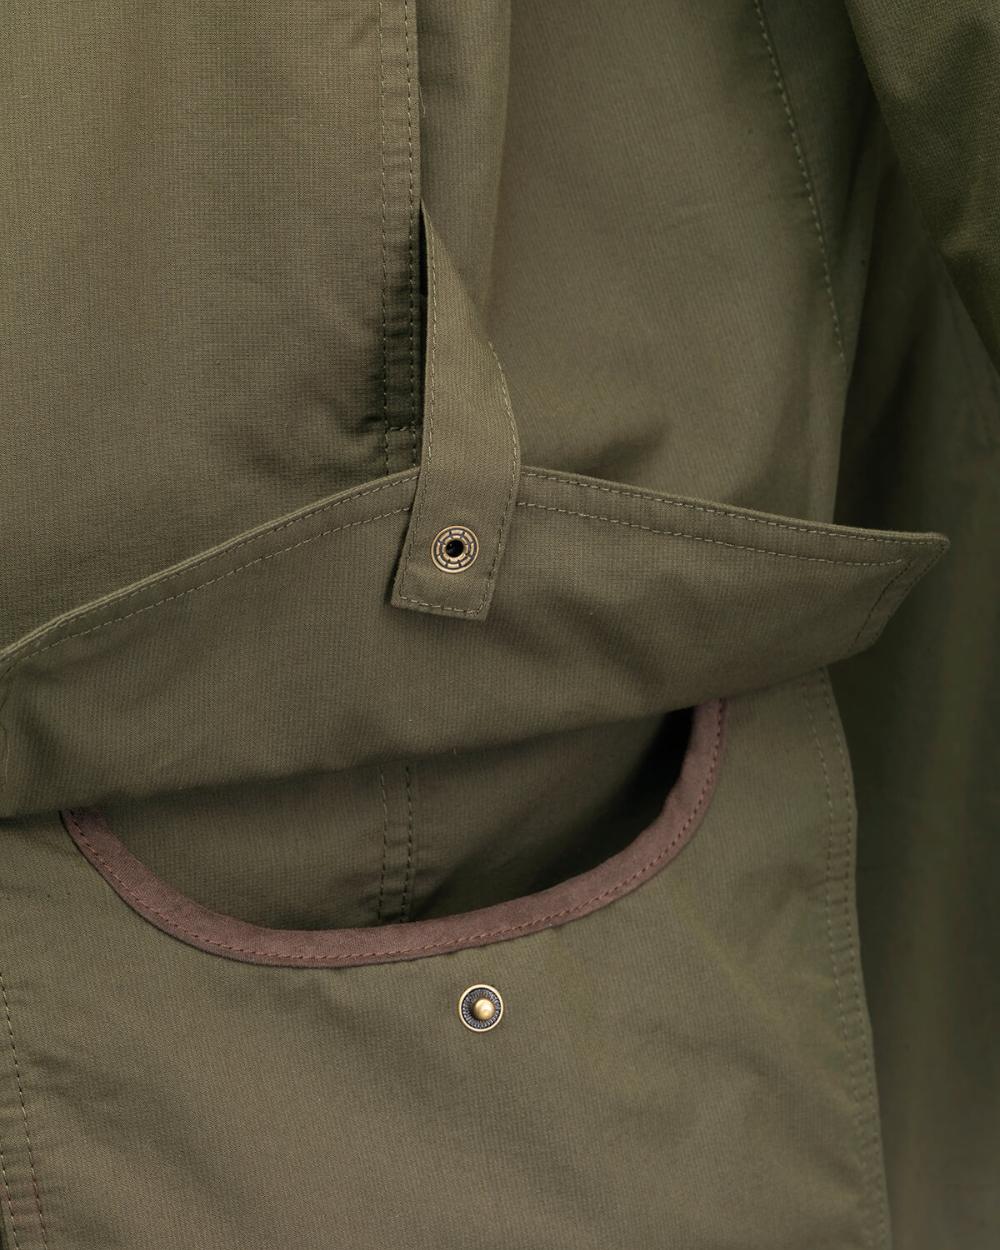 Olive Coloured Laksen Marsh Shooting Coat With CTX On A White Background